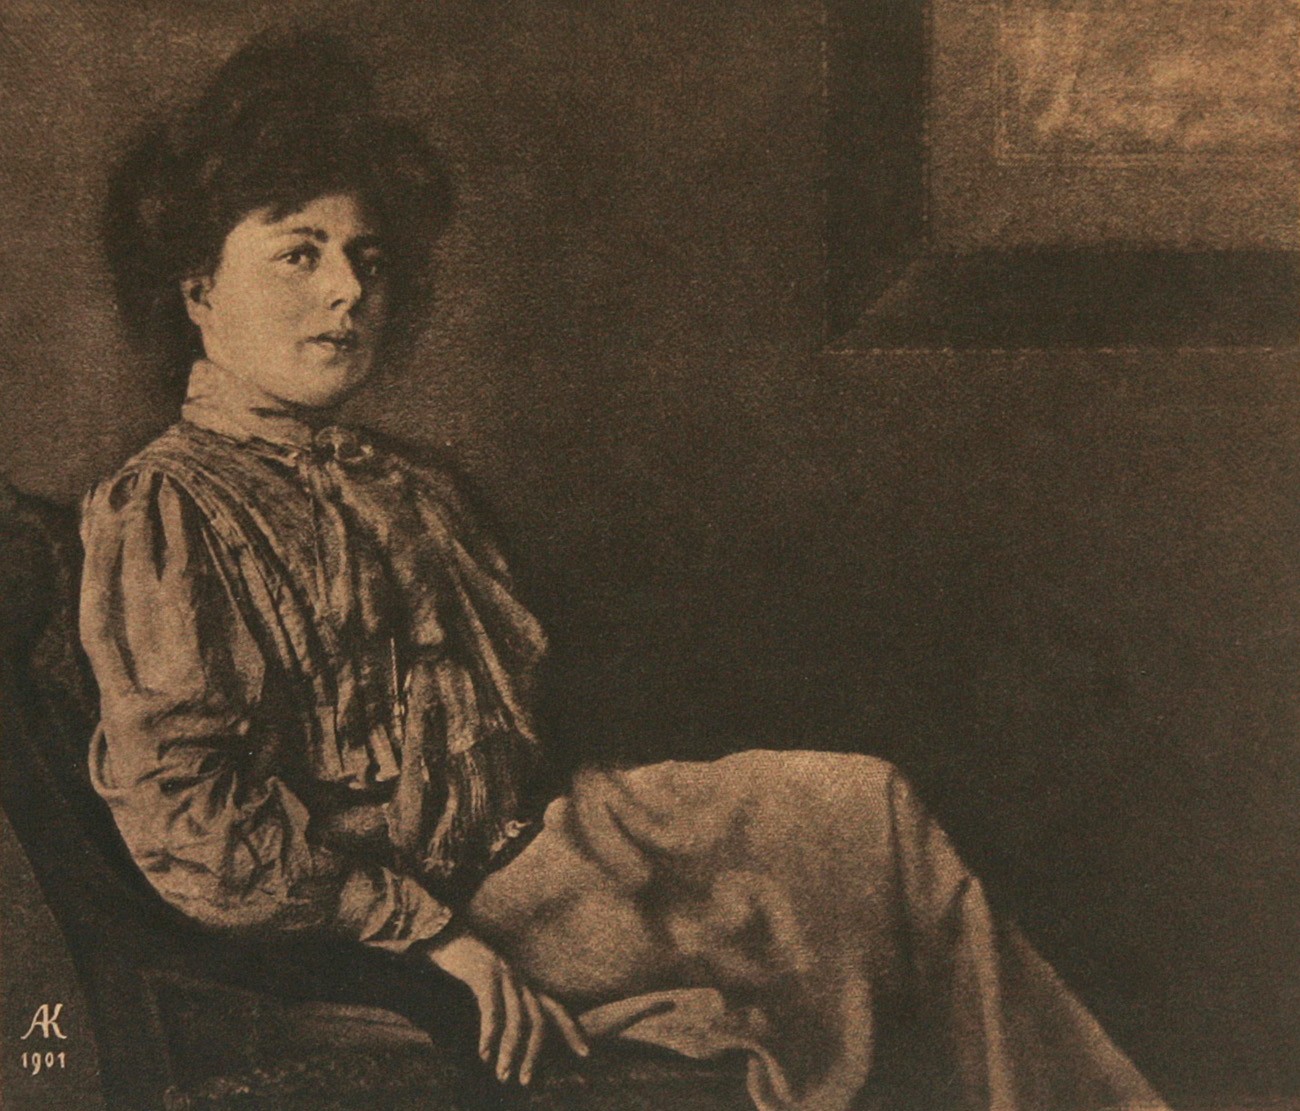 Untitled Portrait of Seated Woman